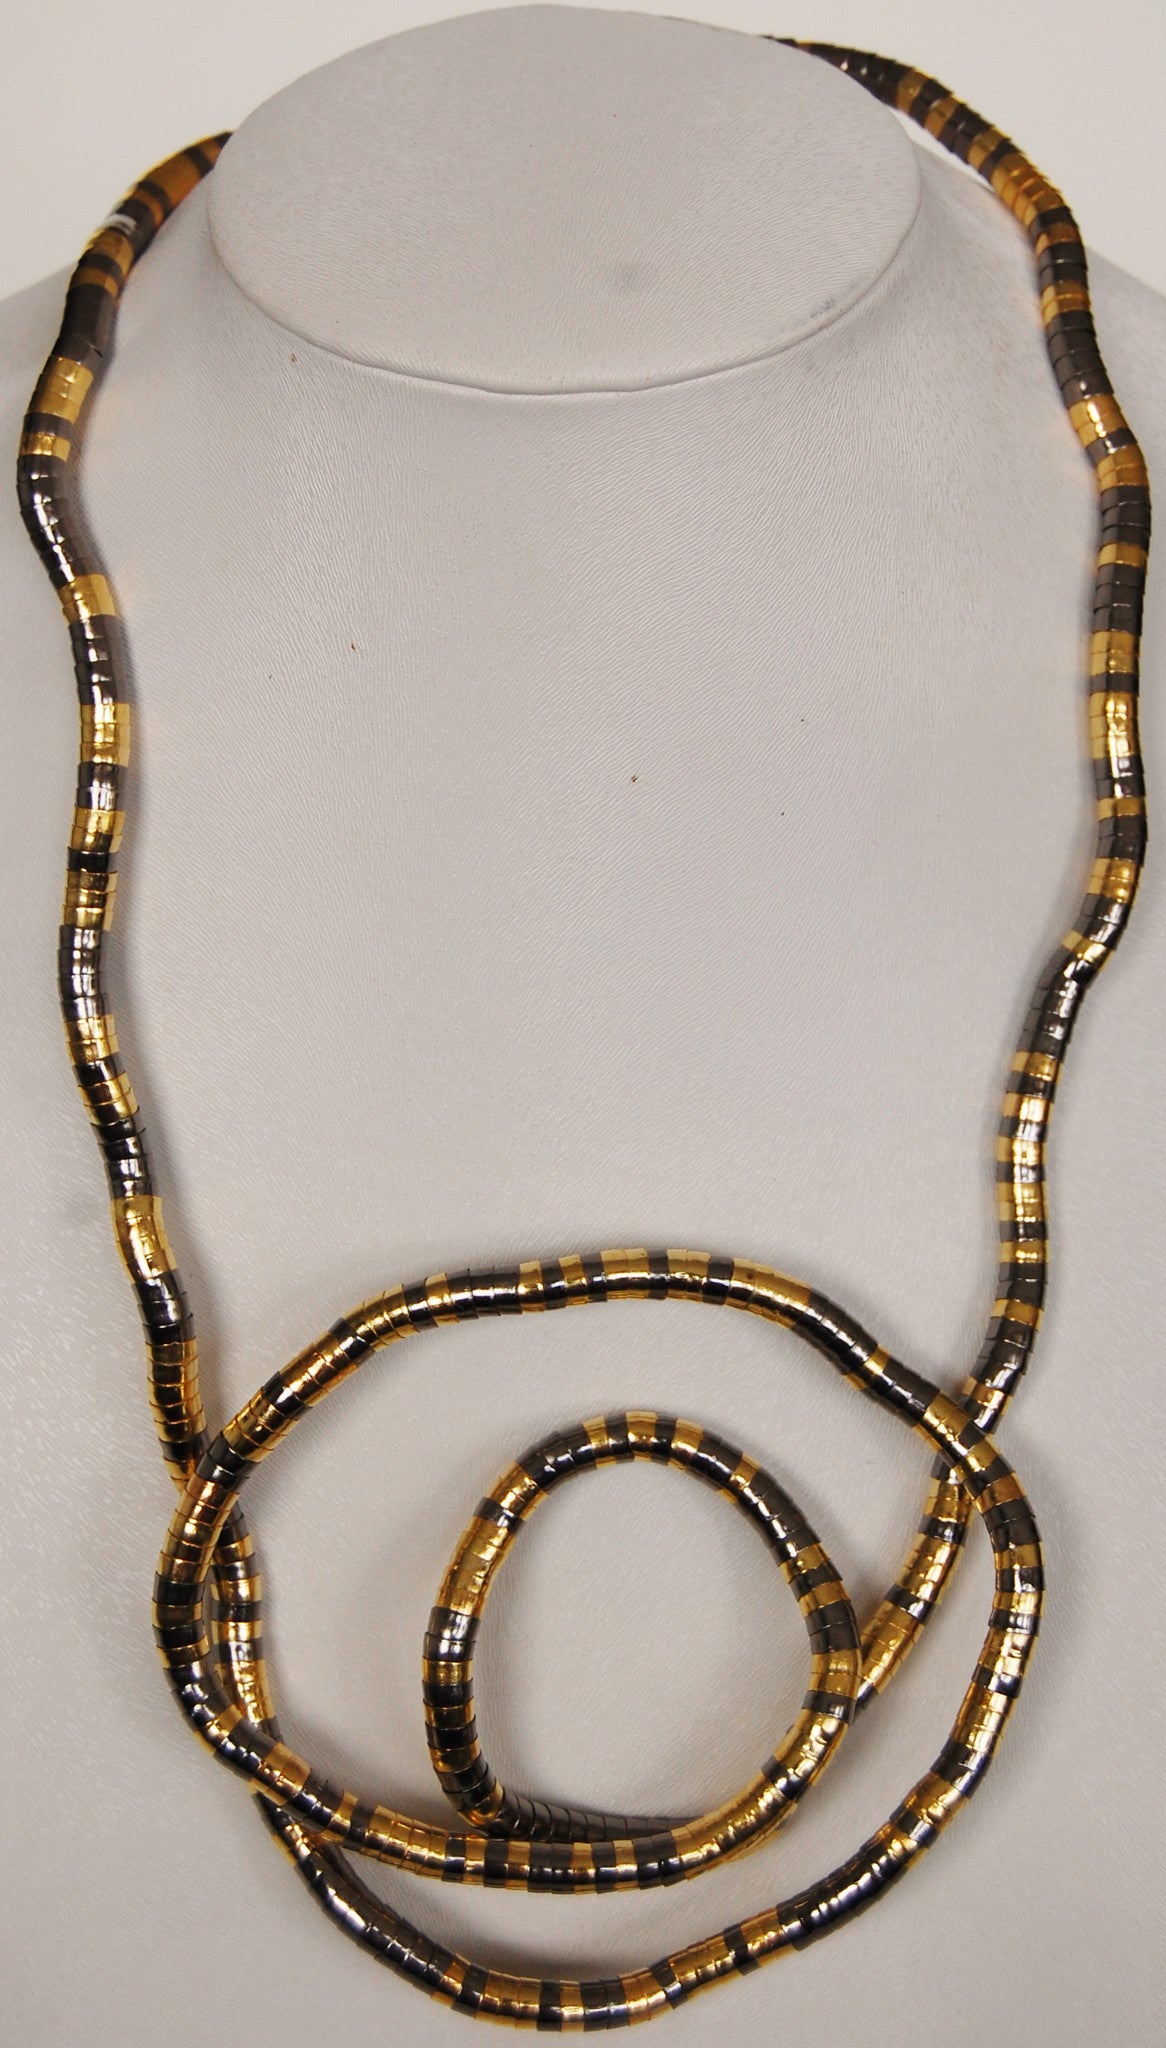 Gun Metal and Gold, 36 inches long